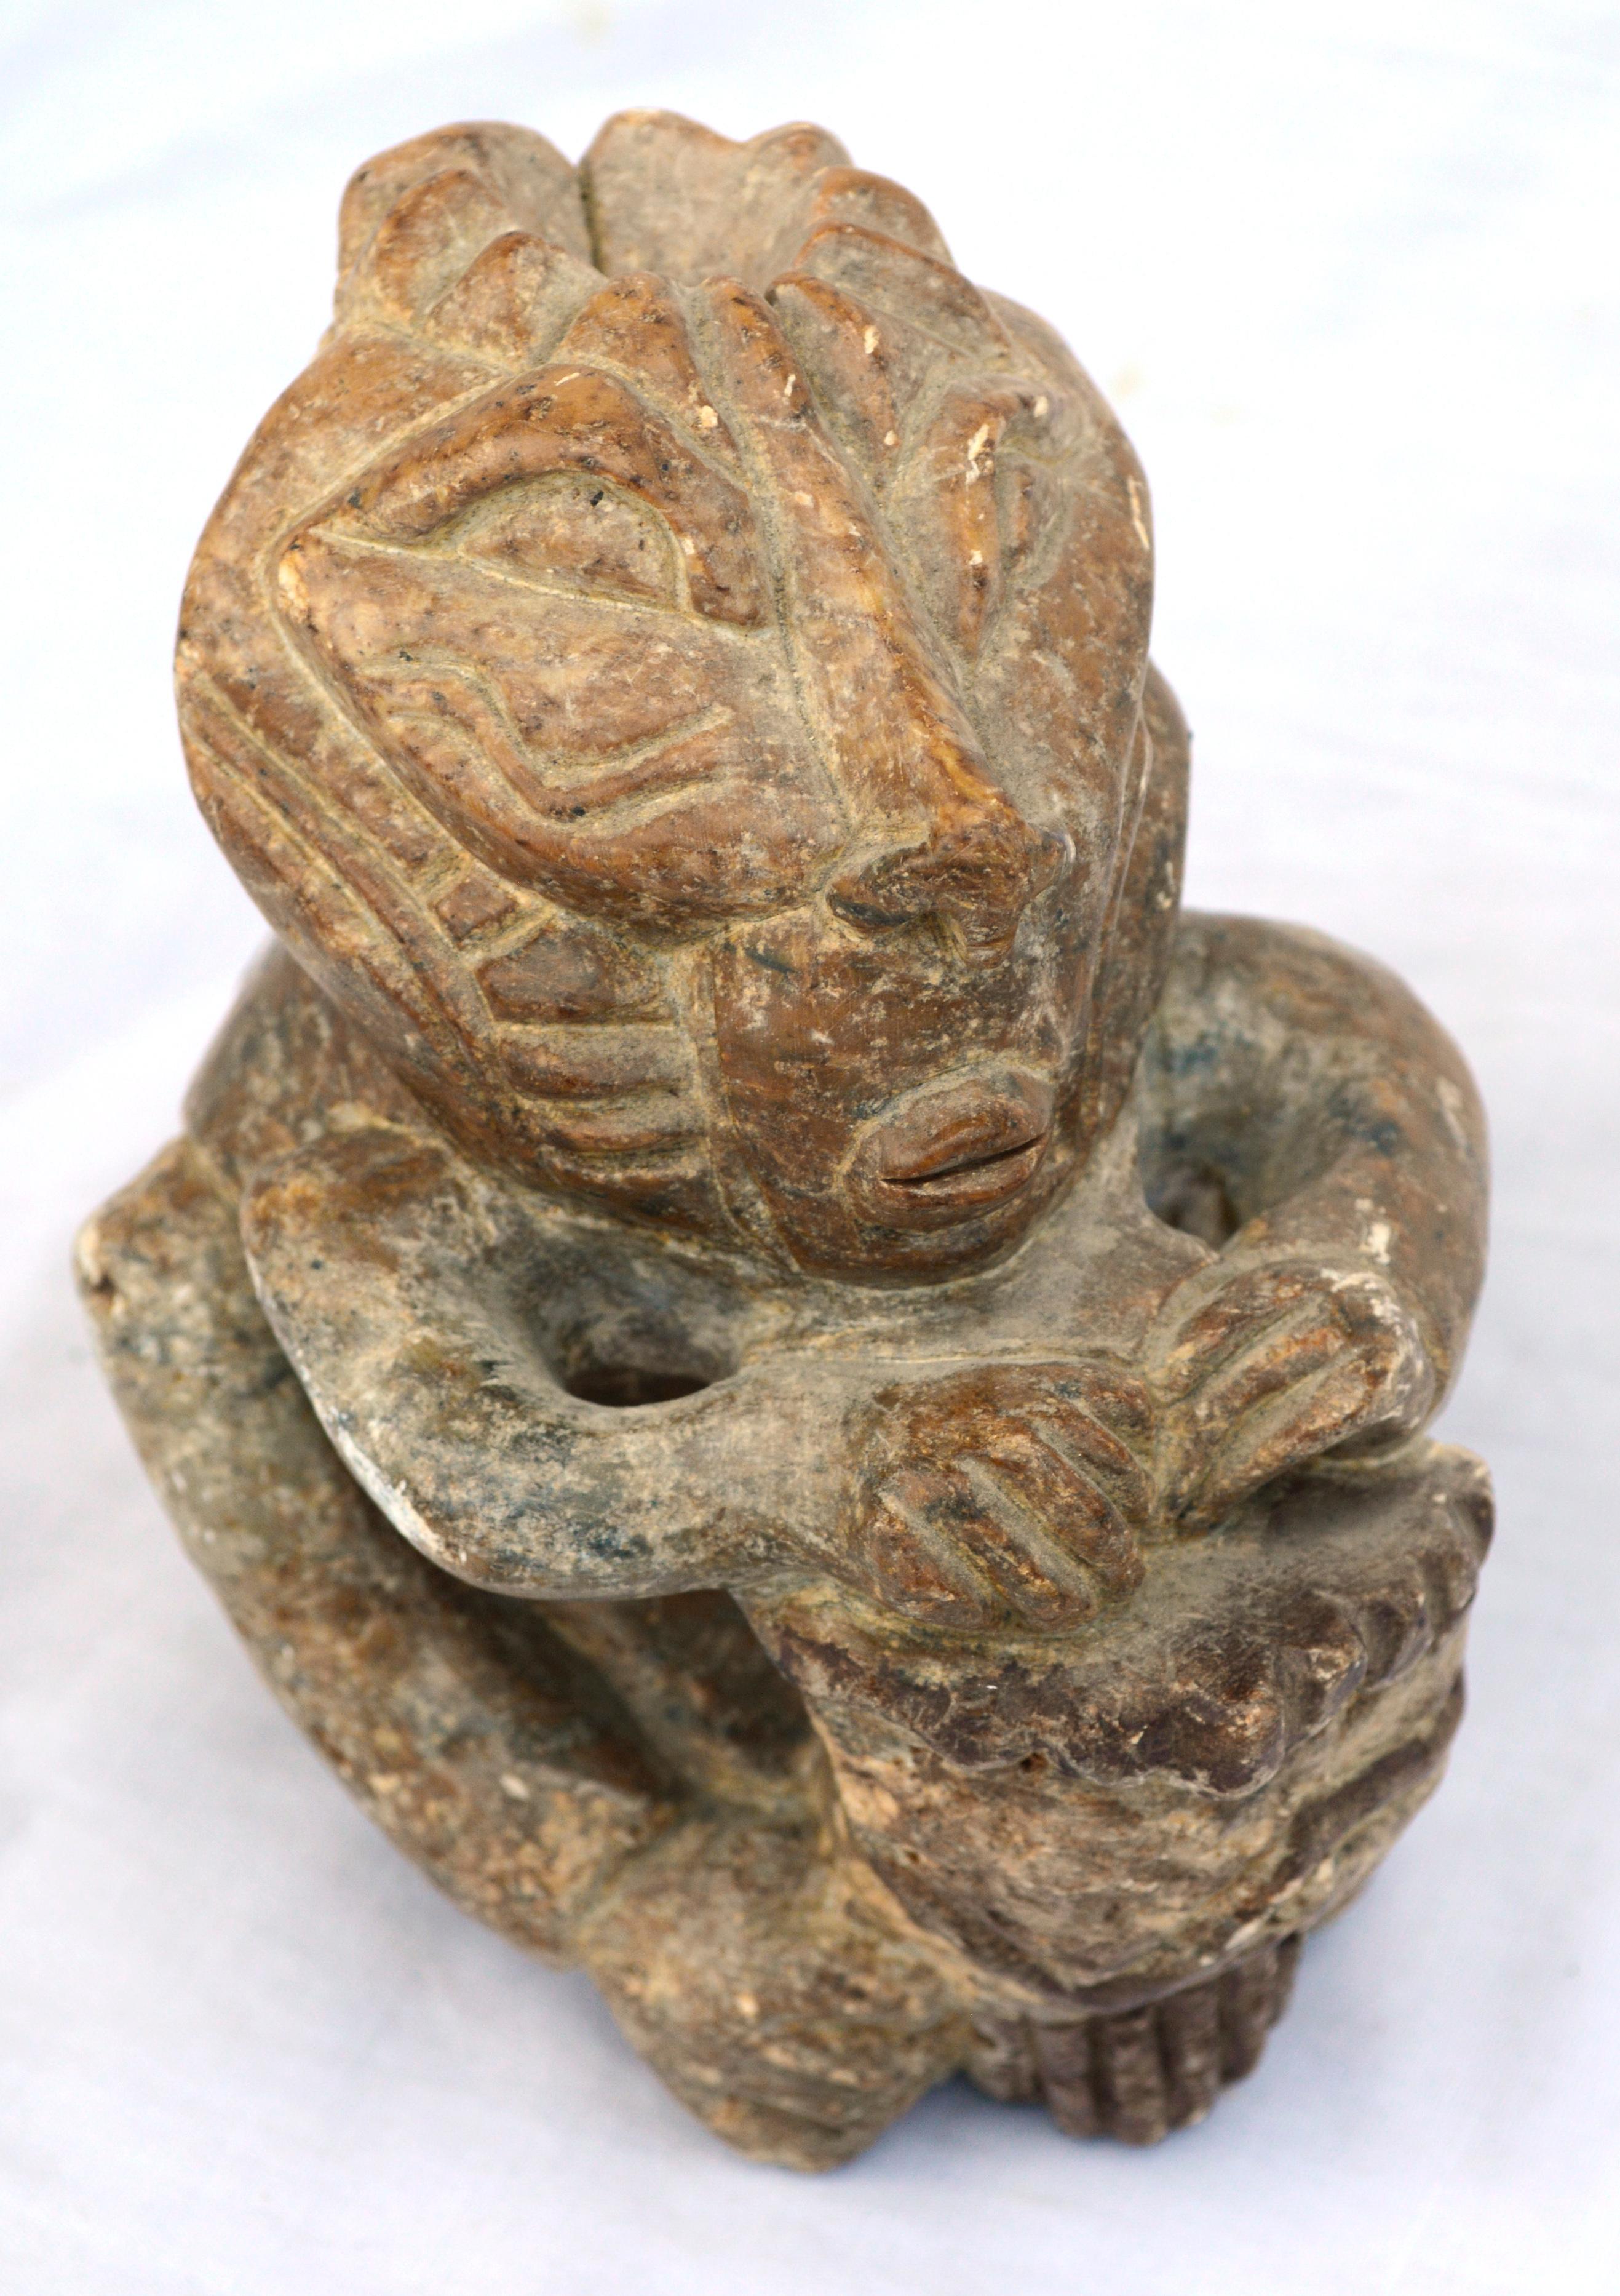 Four-Armed Man with Drum, Tribal Figurative Abstract Carved Stone Sculpture 